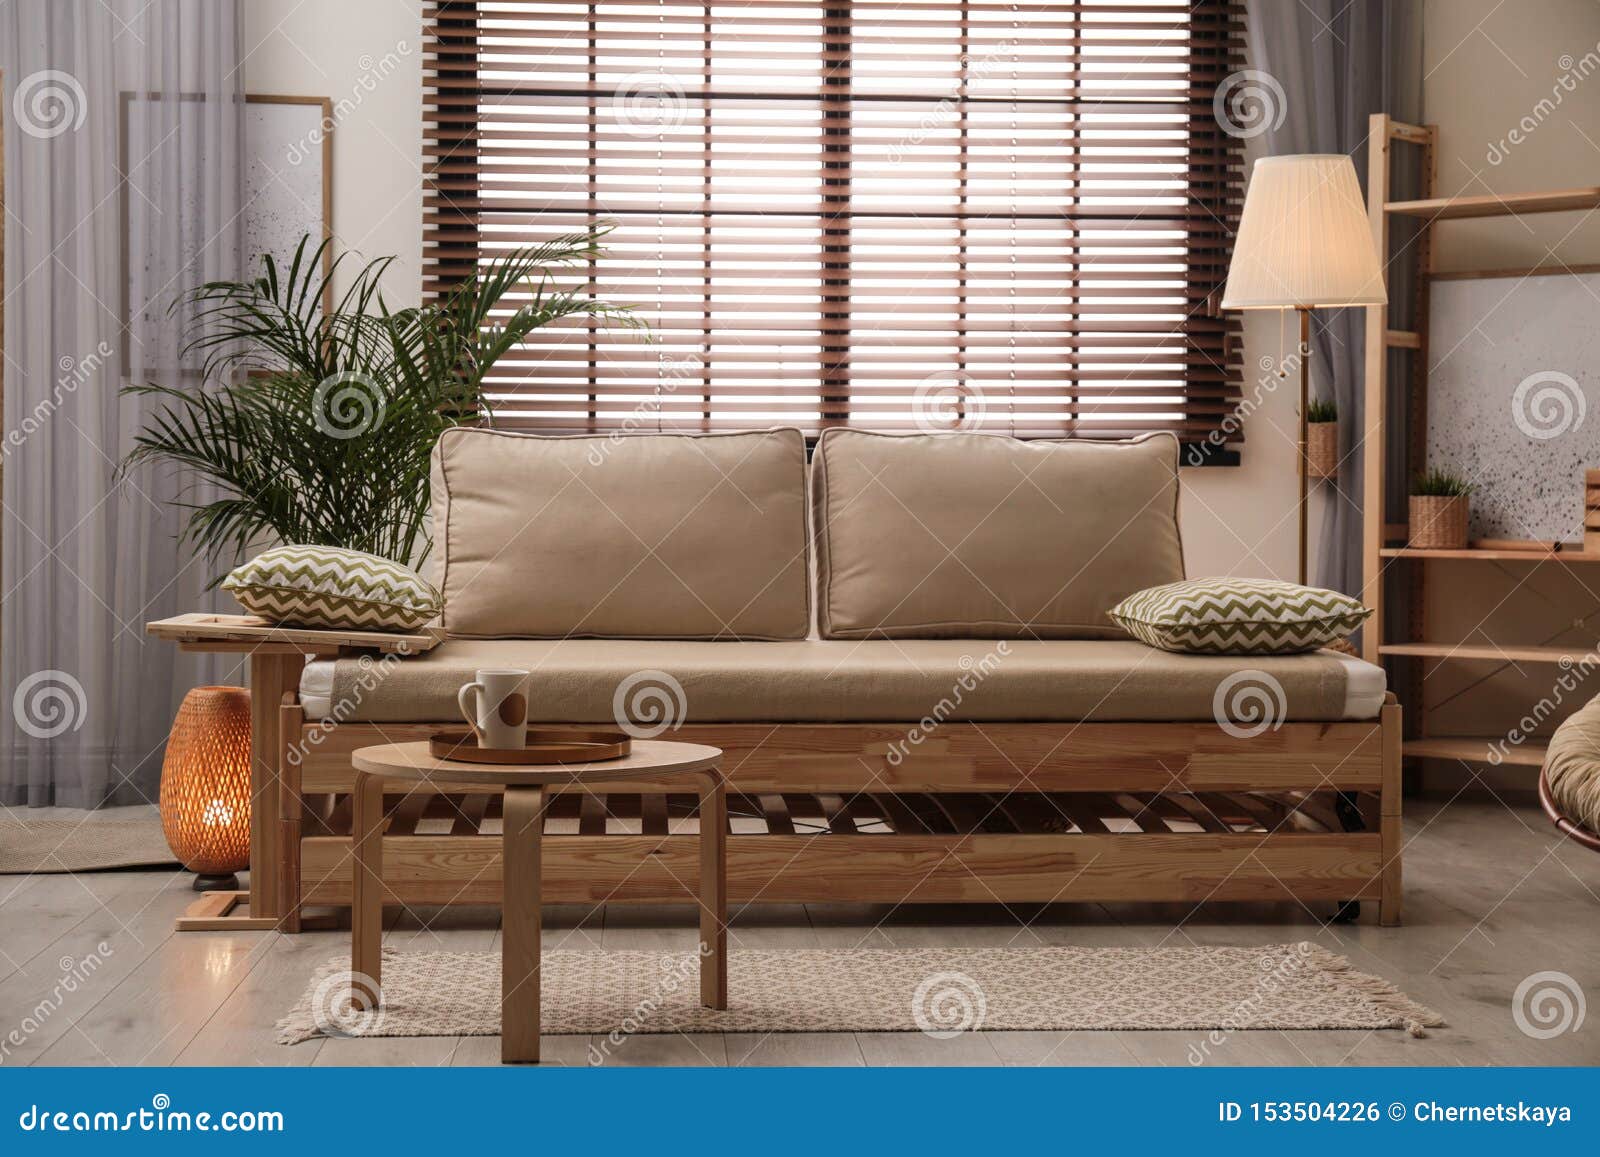 living room interior with sofa, window blinds and decor s